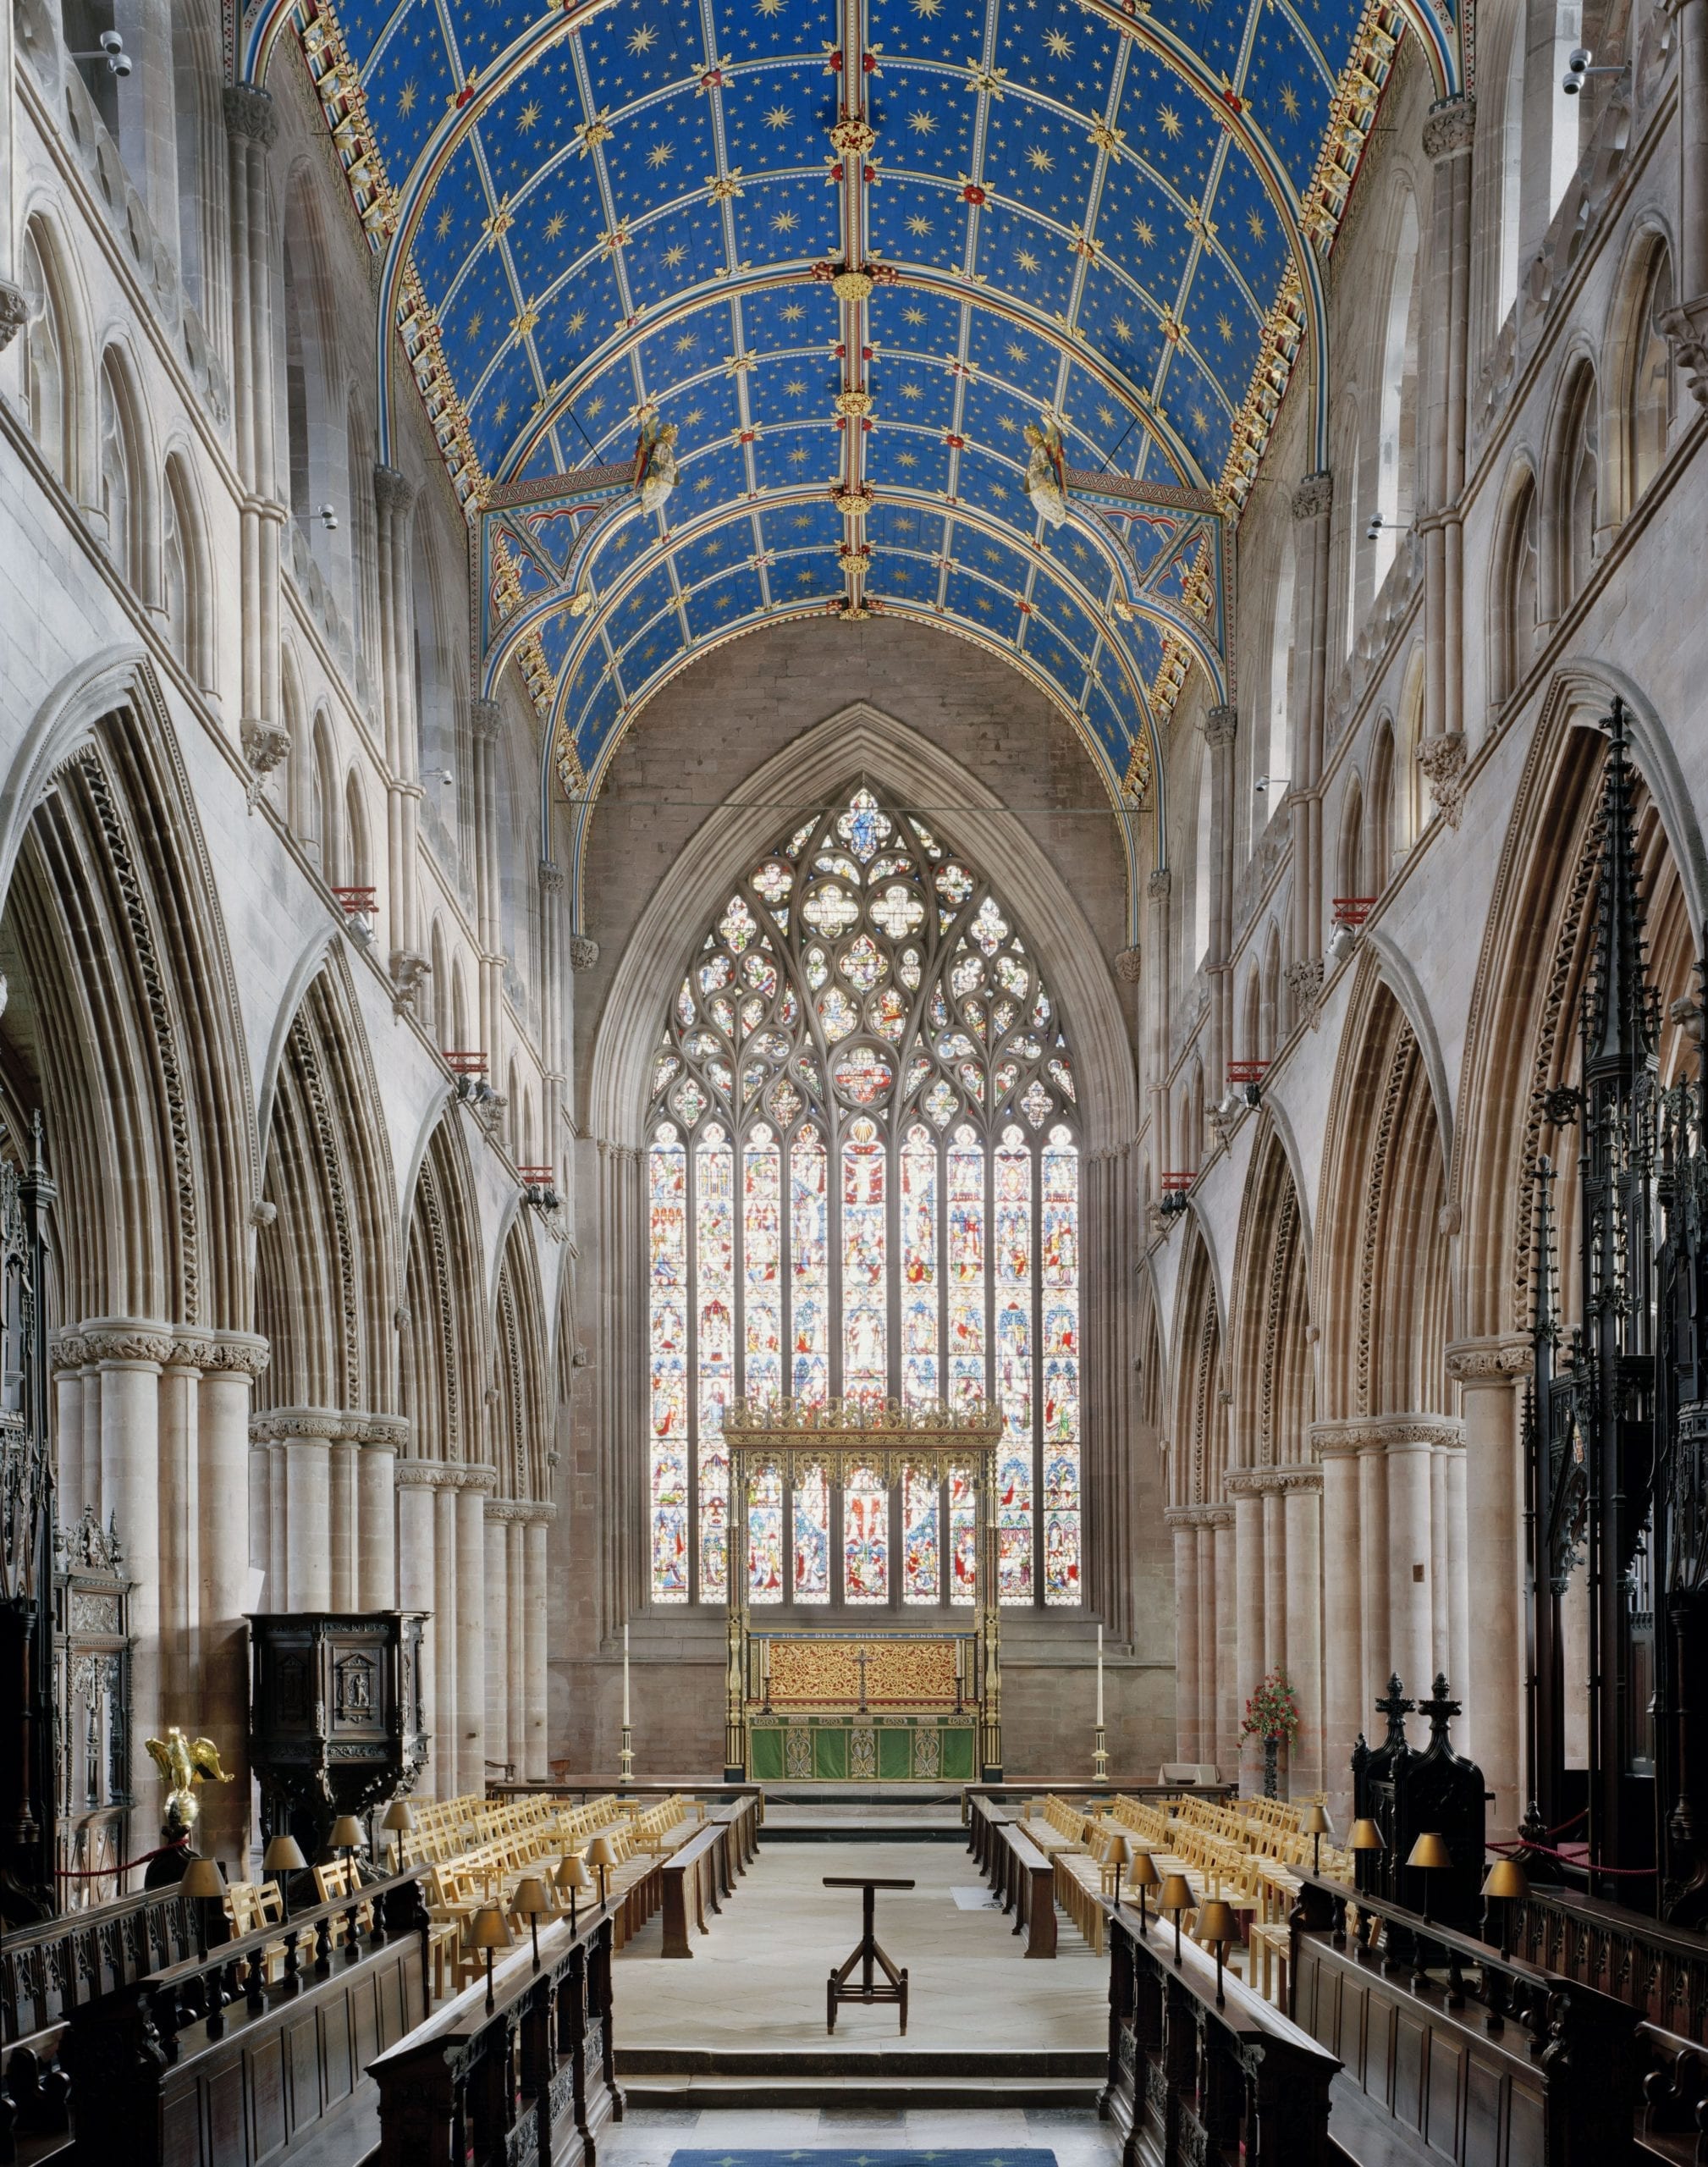 GB. England. Carlisle Cathedral. (Cathedral Church of the Holy and Undivided Trinity) From 'The English Cathedral', a Book published by Merrell in October 2012. Between 2010 and 2012 Peter Marlow photographed the Nave's of all forty two of England's Anglican cathedrals using only natural light at dawn. Marlow’s photographs are accompanied by his commentary on the project, including sketches and preparatory shots; an introduction by V&A senior photography curator Martin Barnes on the tradition of church photography in England, and a concise summary of each cathedral interior by architectural historian John Goodall. 2012